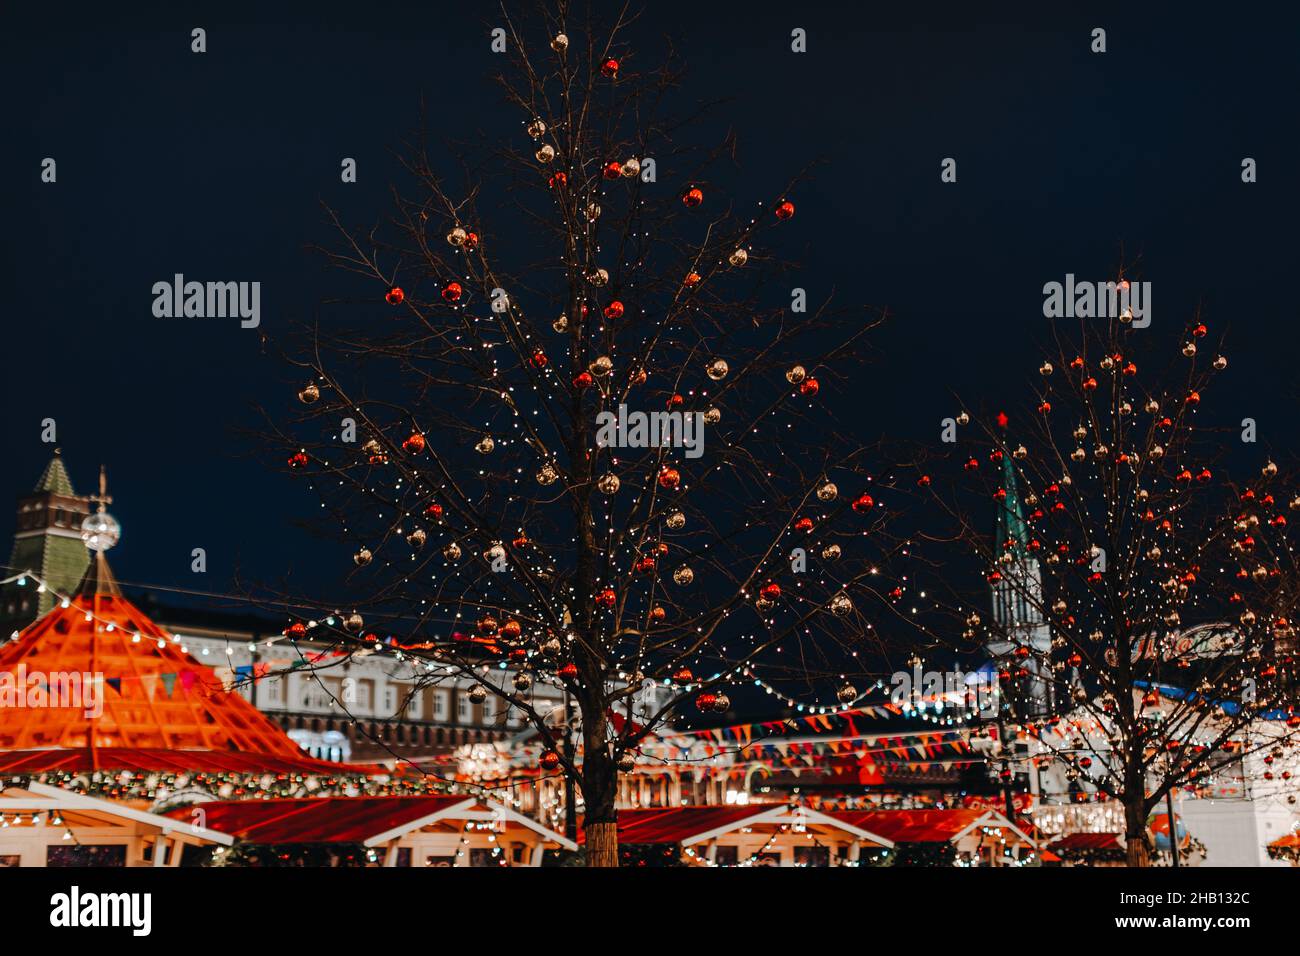 Tree branches decorated with red and gold shiny Christmas balls. New Year outdoor decorations against a blue evening sky and glowing building. Christm Stock Photo